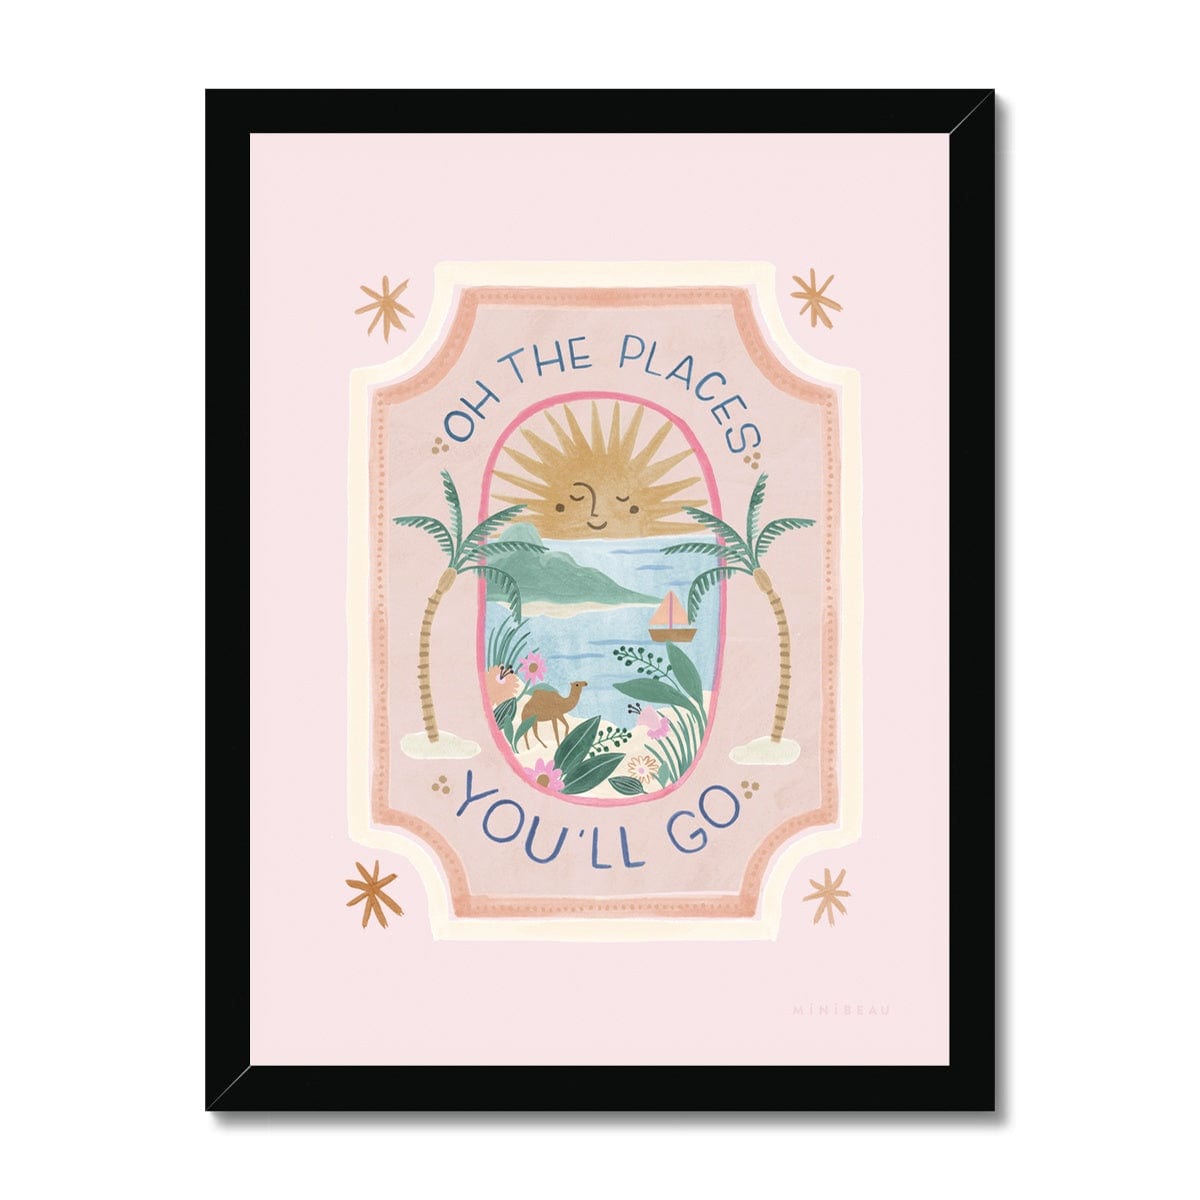 Art print in a black frame. Our Oh, the places you'll go art print consists of a happy sun setting on the horizon of a tropical island, with a sailing boat in the sea, a camel on the beach, exotic flowers, and a palm tree either side, in a dusty pink frame with the words OH THE PLACES YOU'LL GO in blue, in a further light pink frame.